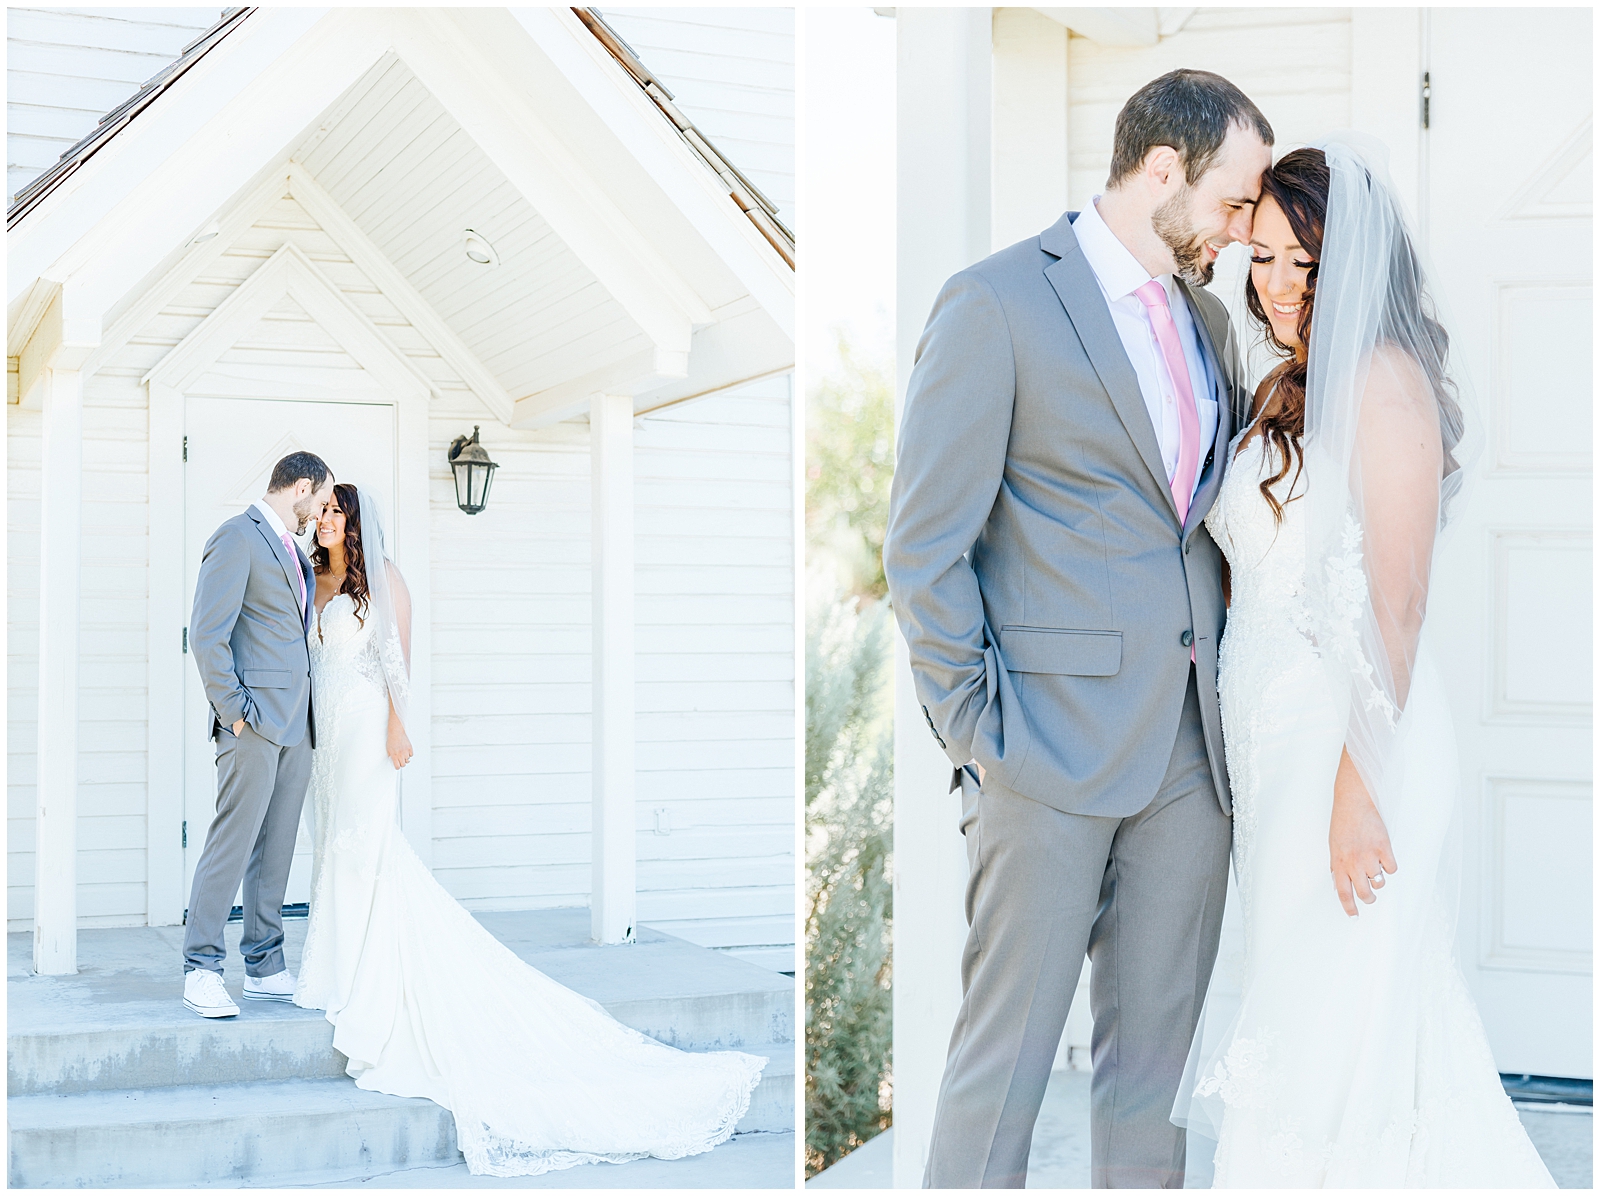 Bride and Groom Portraits at Summer Still Water Hollow Wedding